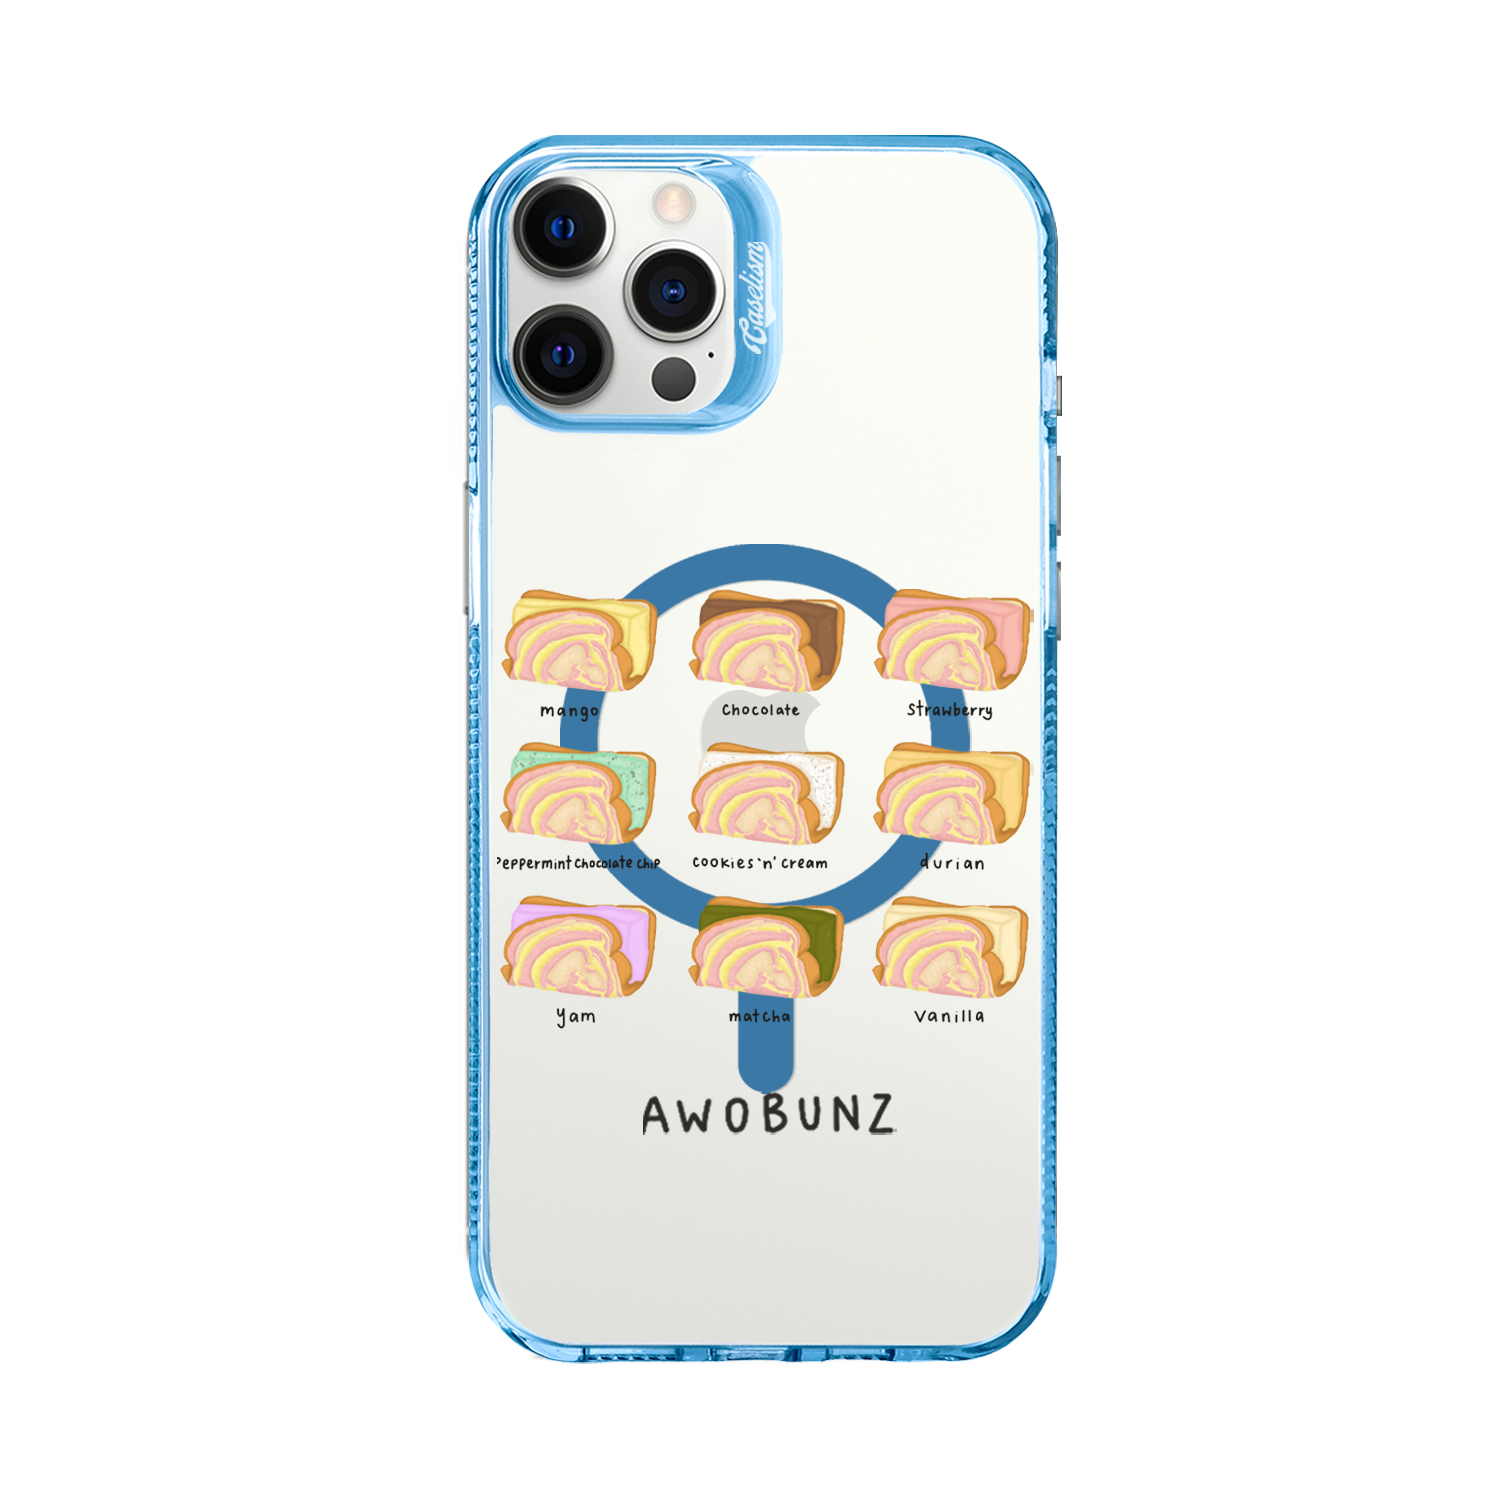 AWOB003 - ColorLite Case for iPhone